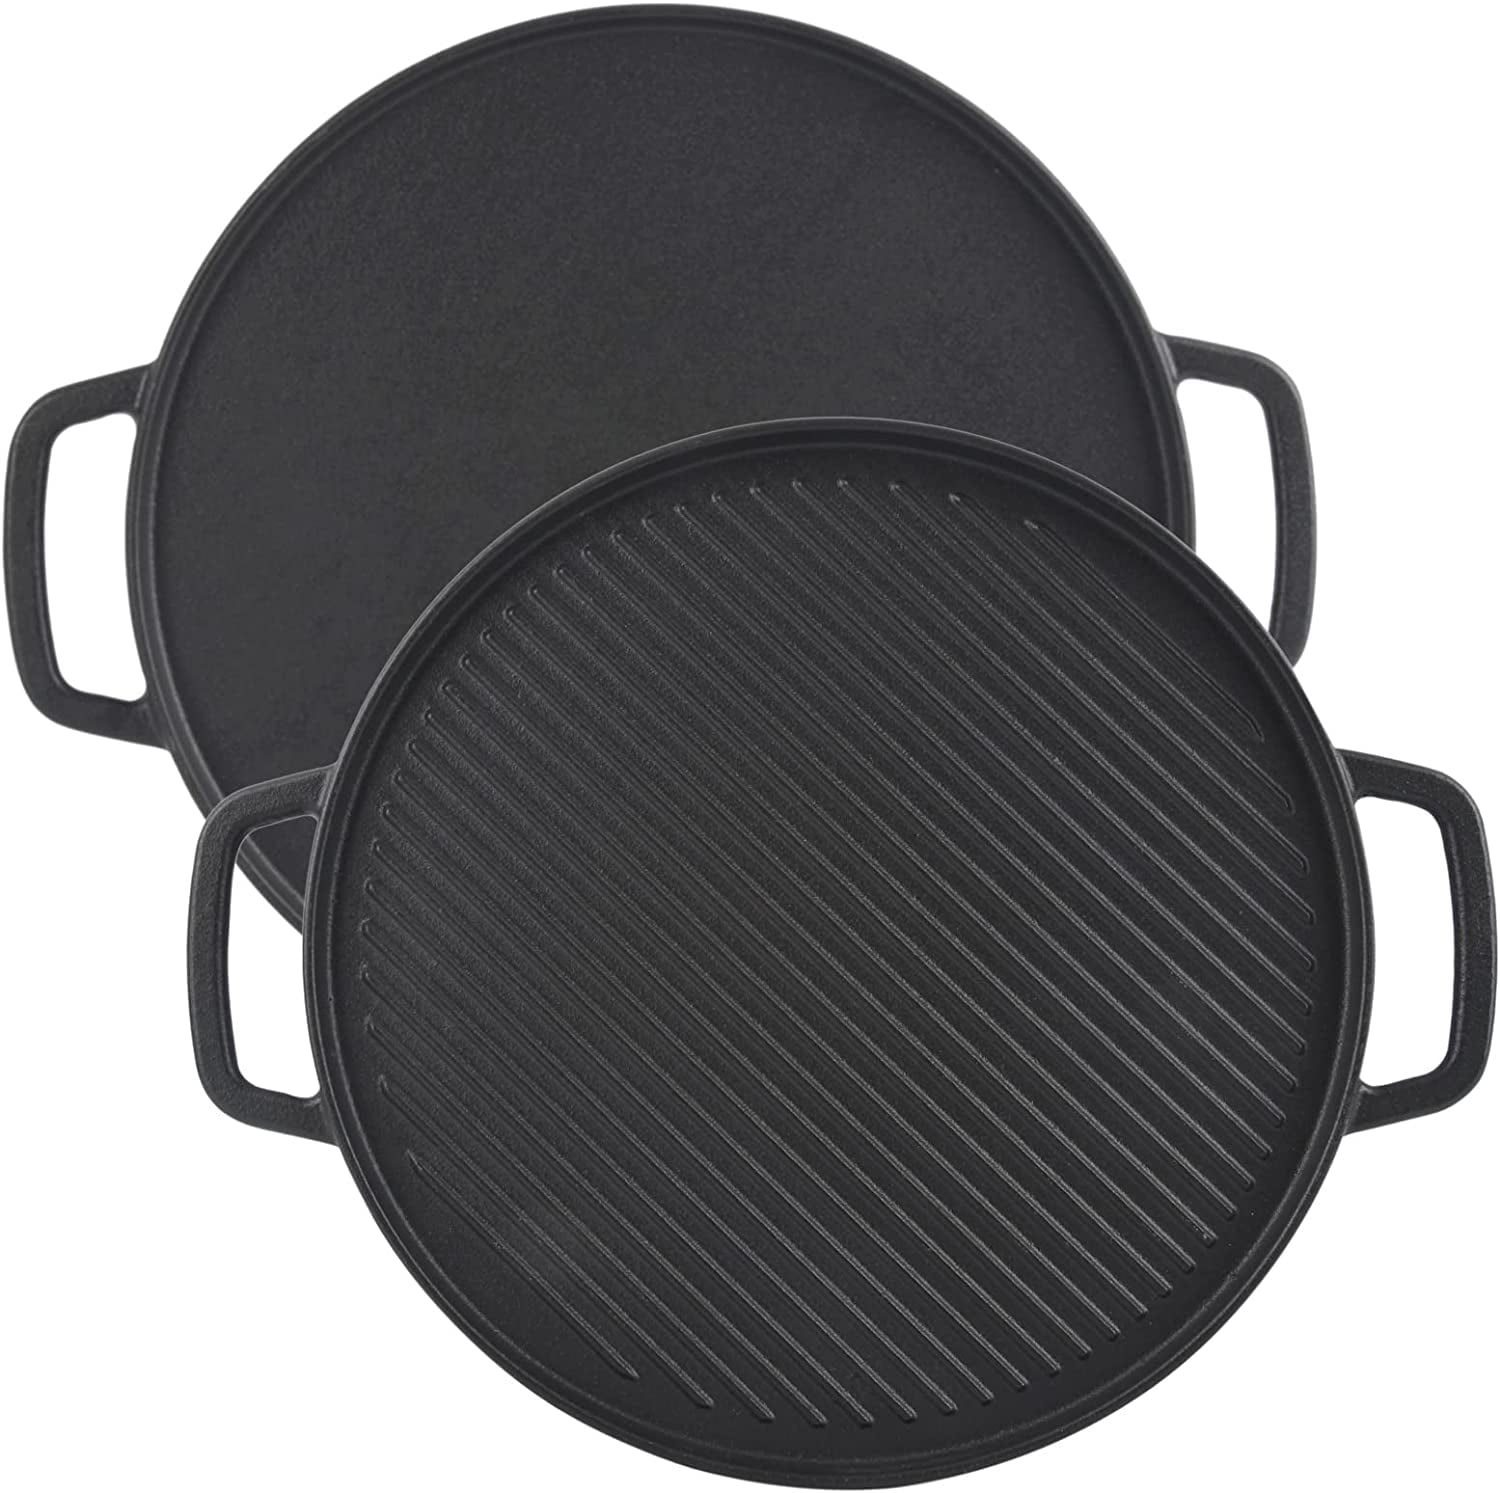 Good Helper 8in Grill Topper Pan Cast Iron BBQ Grill Accessories Outdoor Grill Pans Nonstick Grilling Pan with Holes Handles Heavy Duty Grill Tray